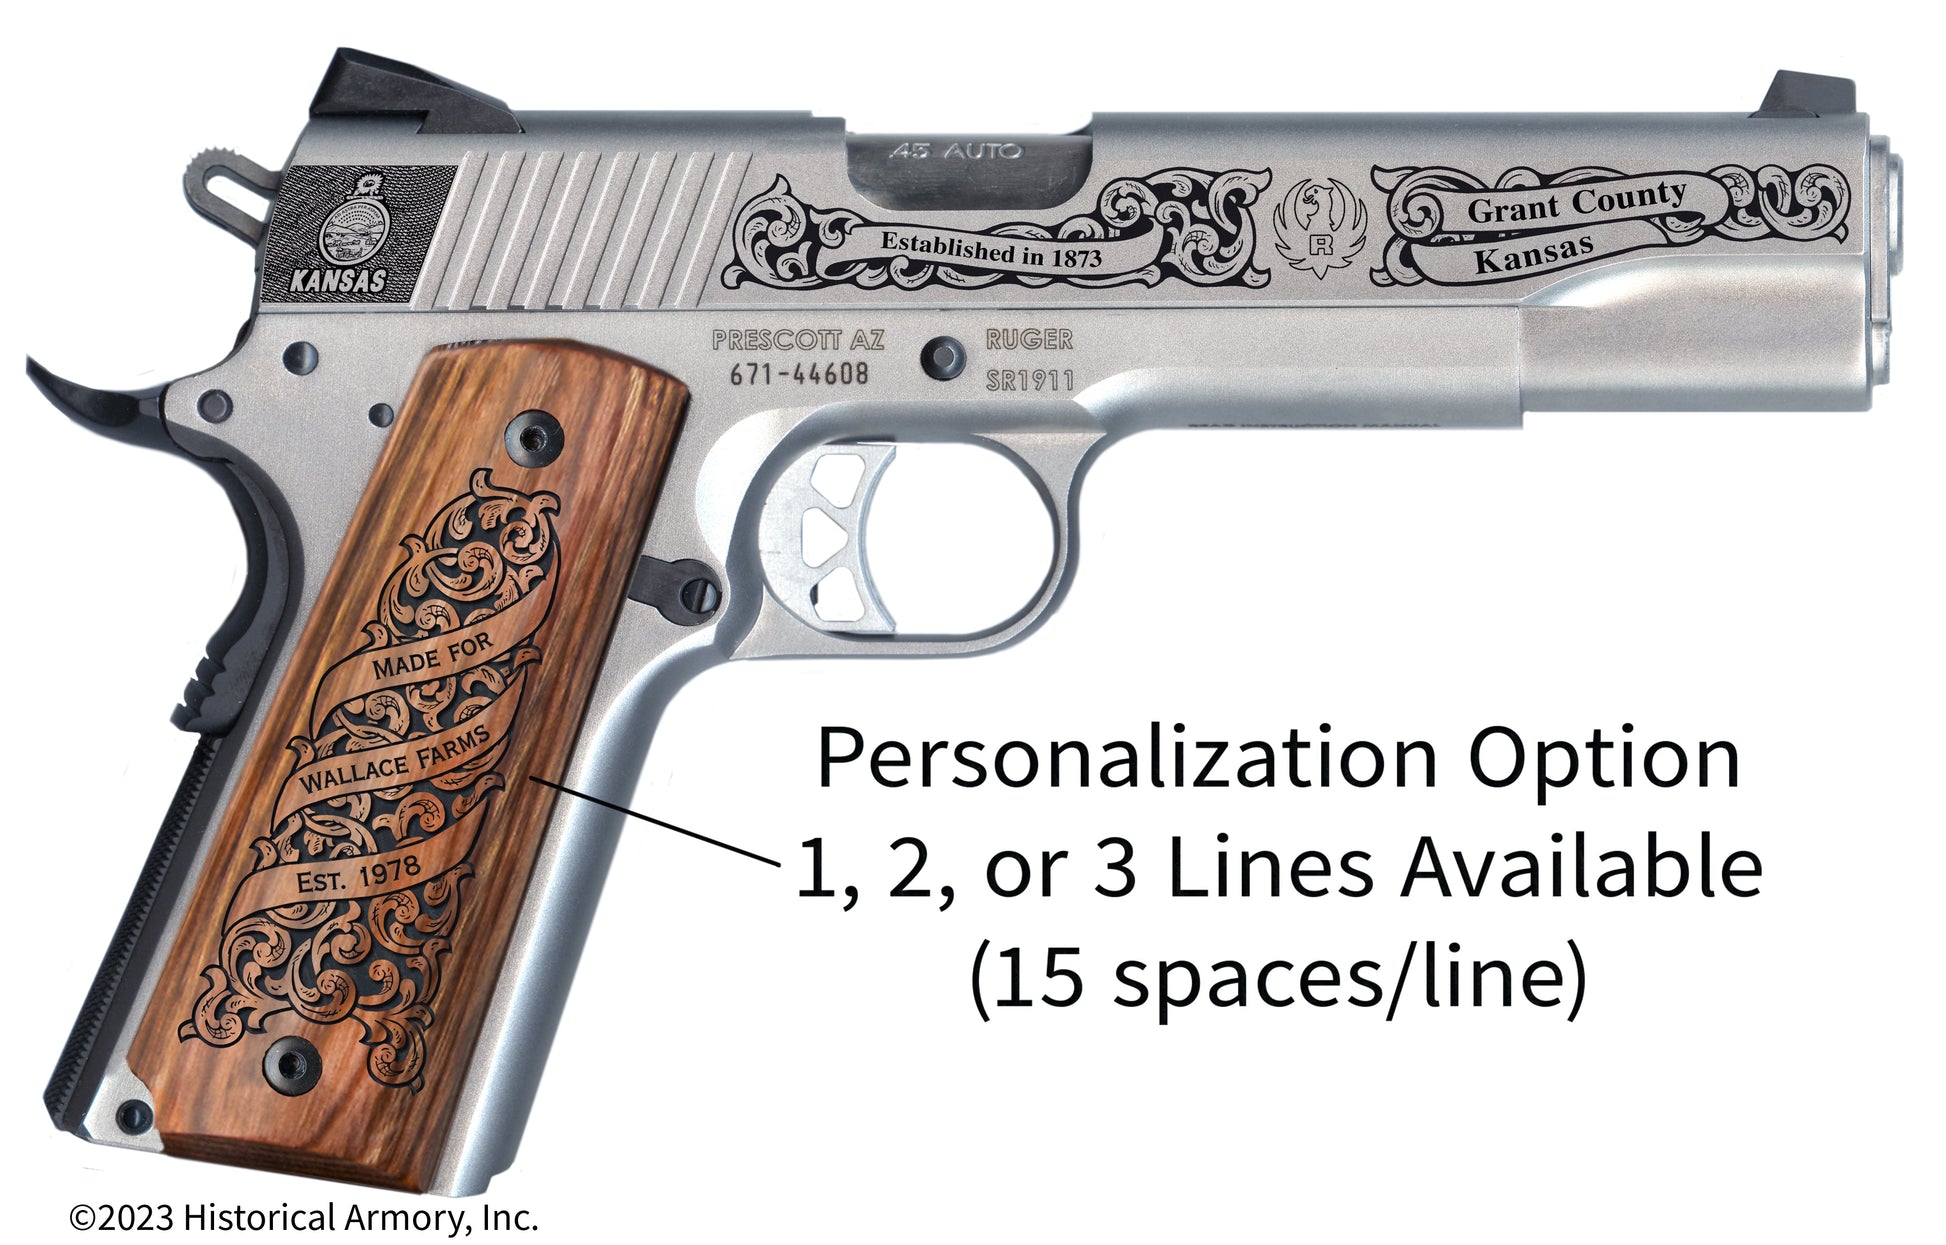 Grant County Kansas Personalized Engraved .45 Auto Ruger 1911